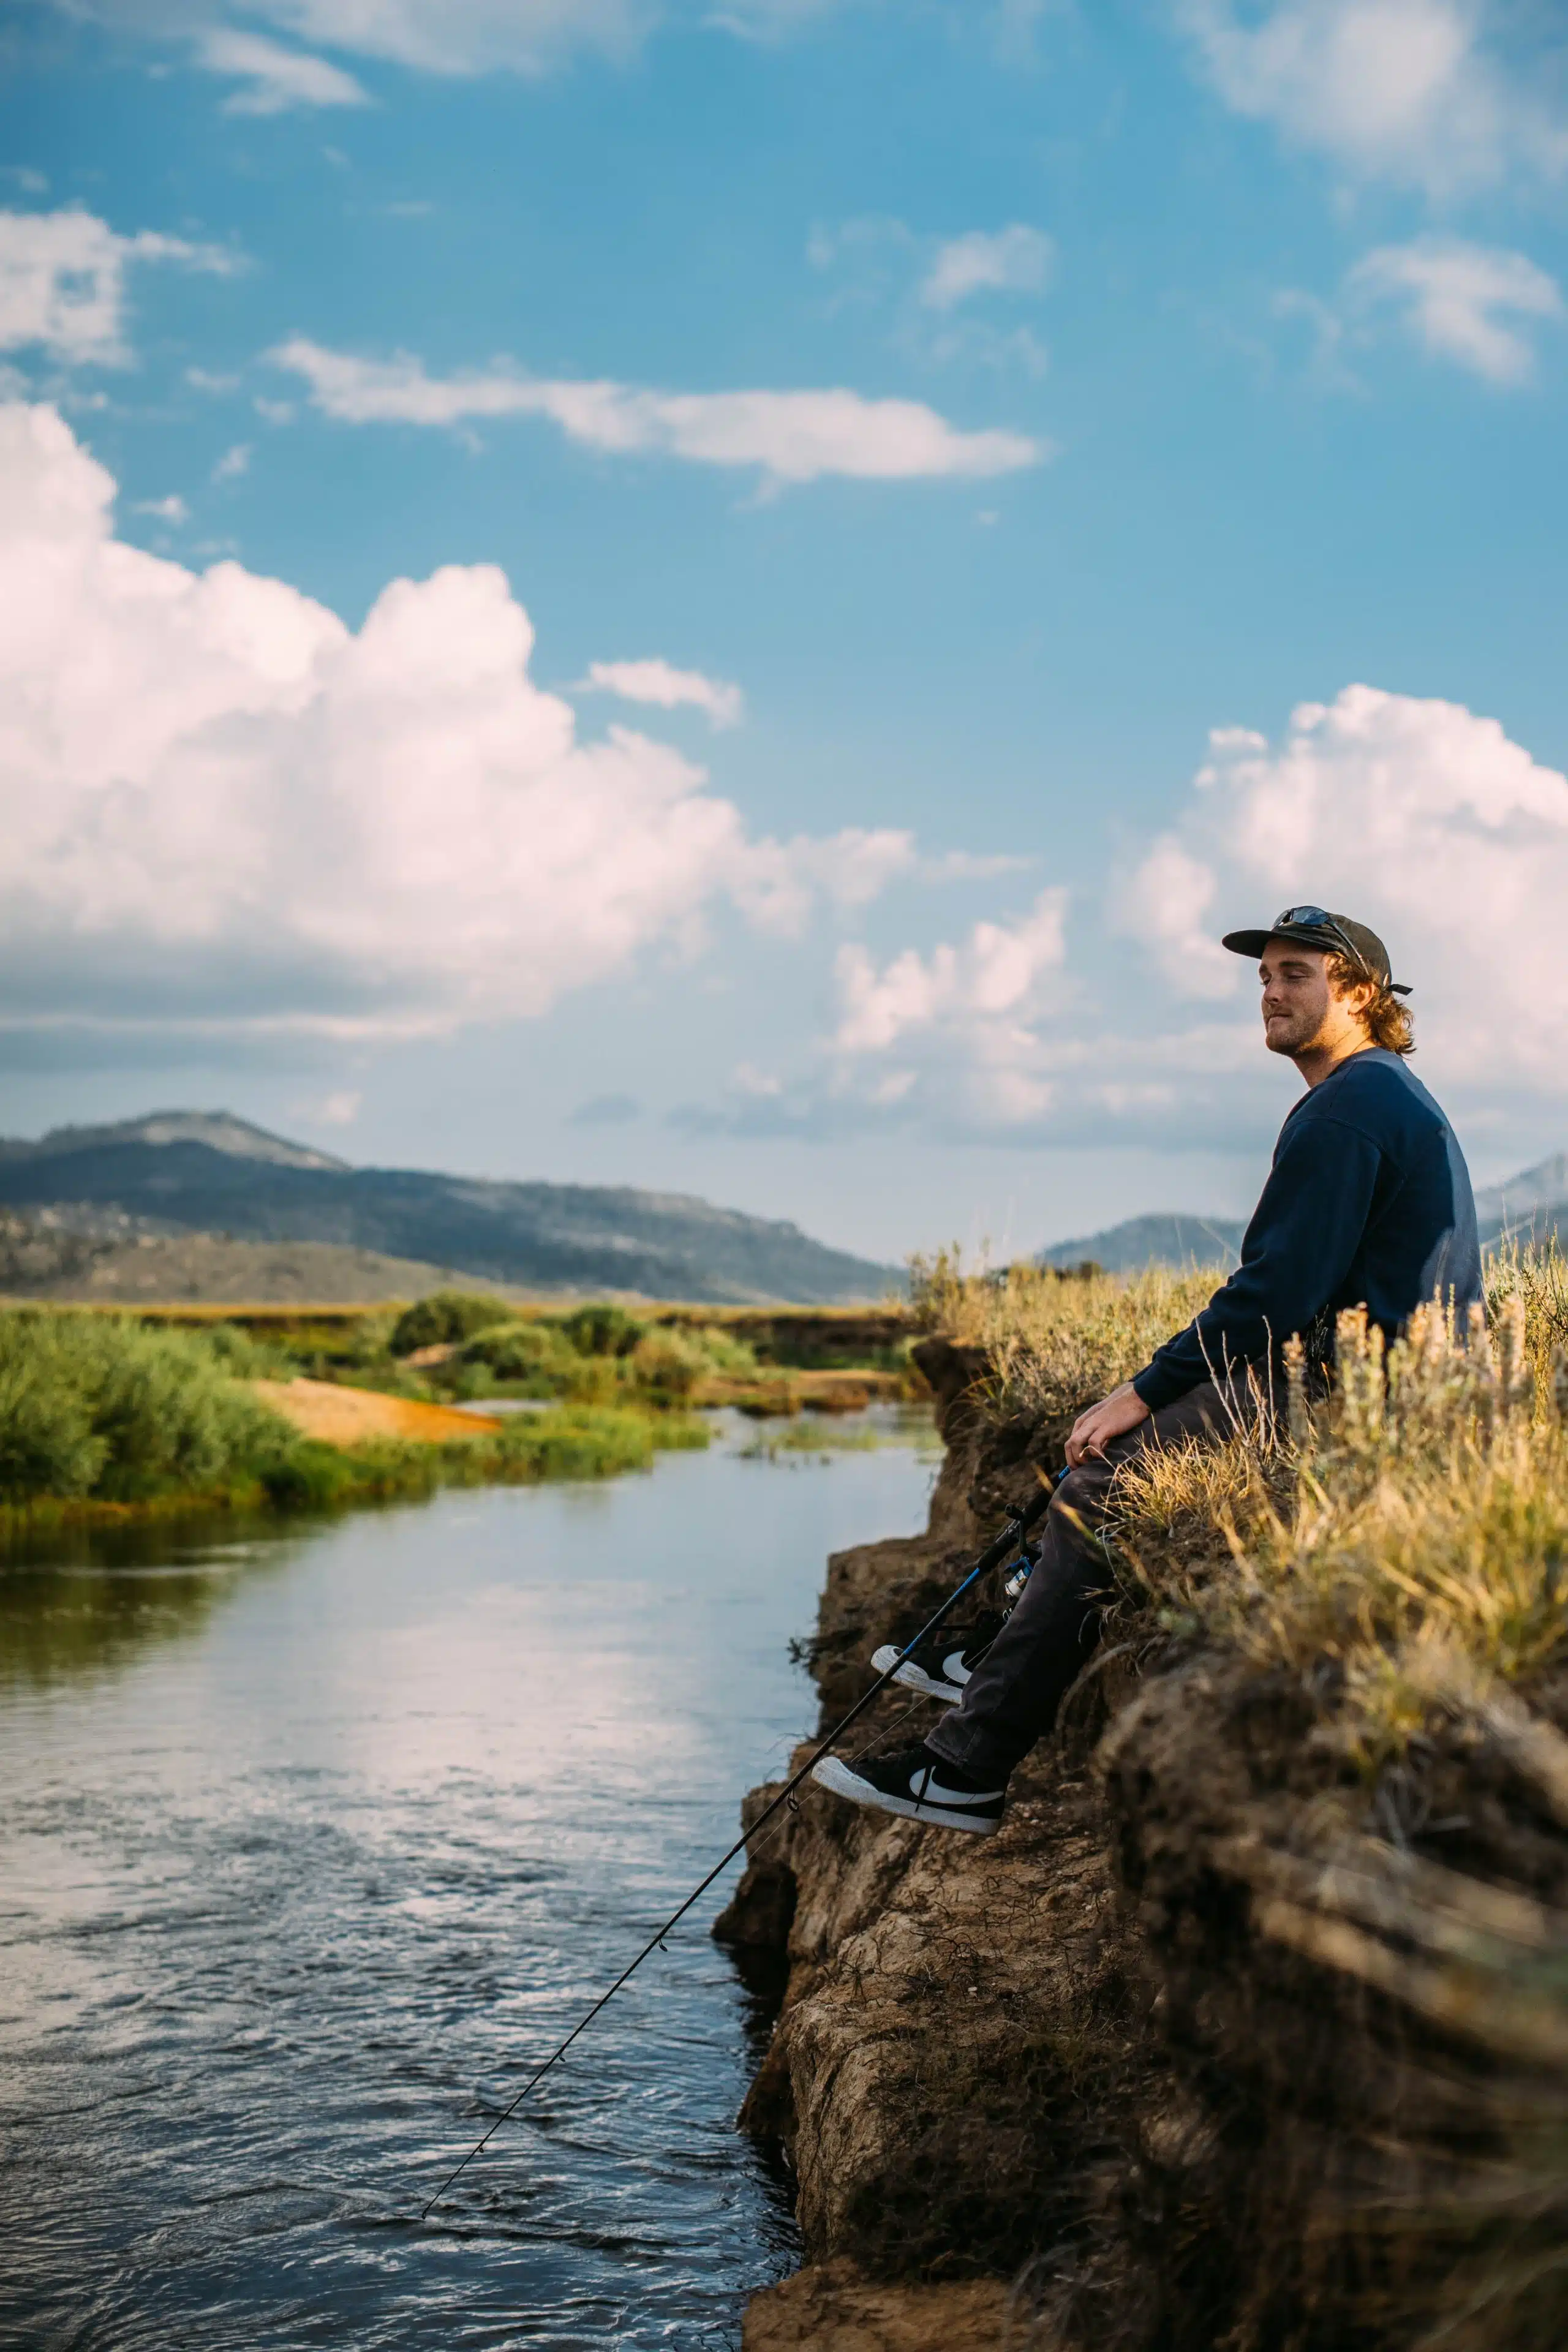 man sitting on edge of rocks fishing into stream below him, looking content.